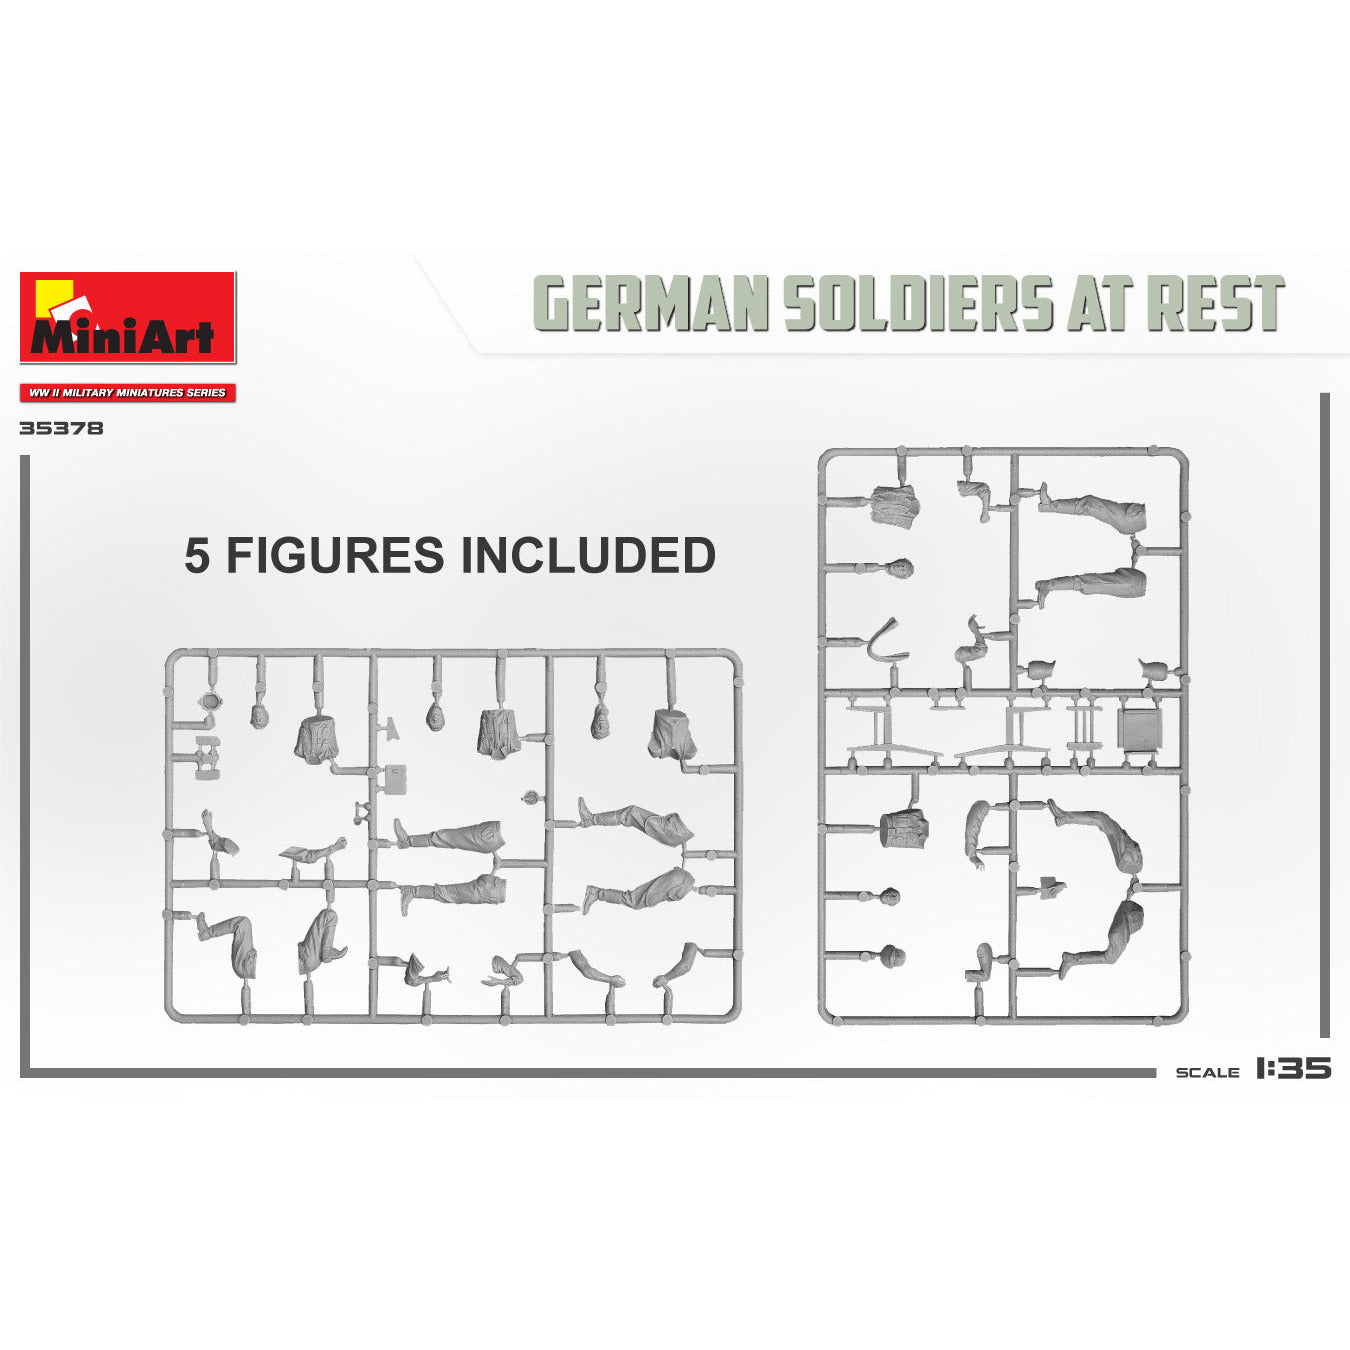 MINIART 1/35 German Soldiers at Rest